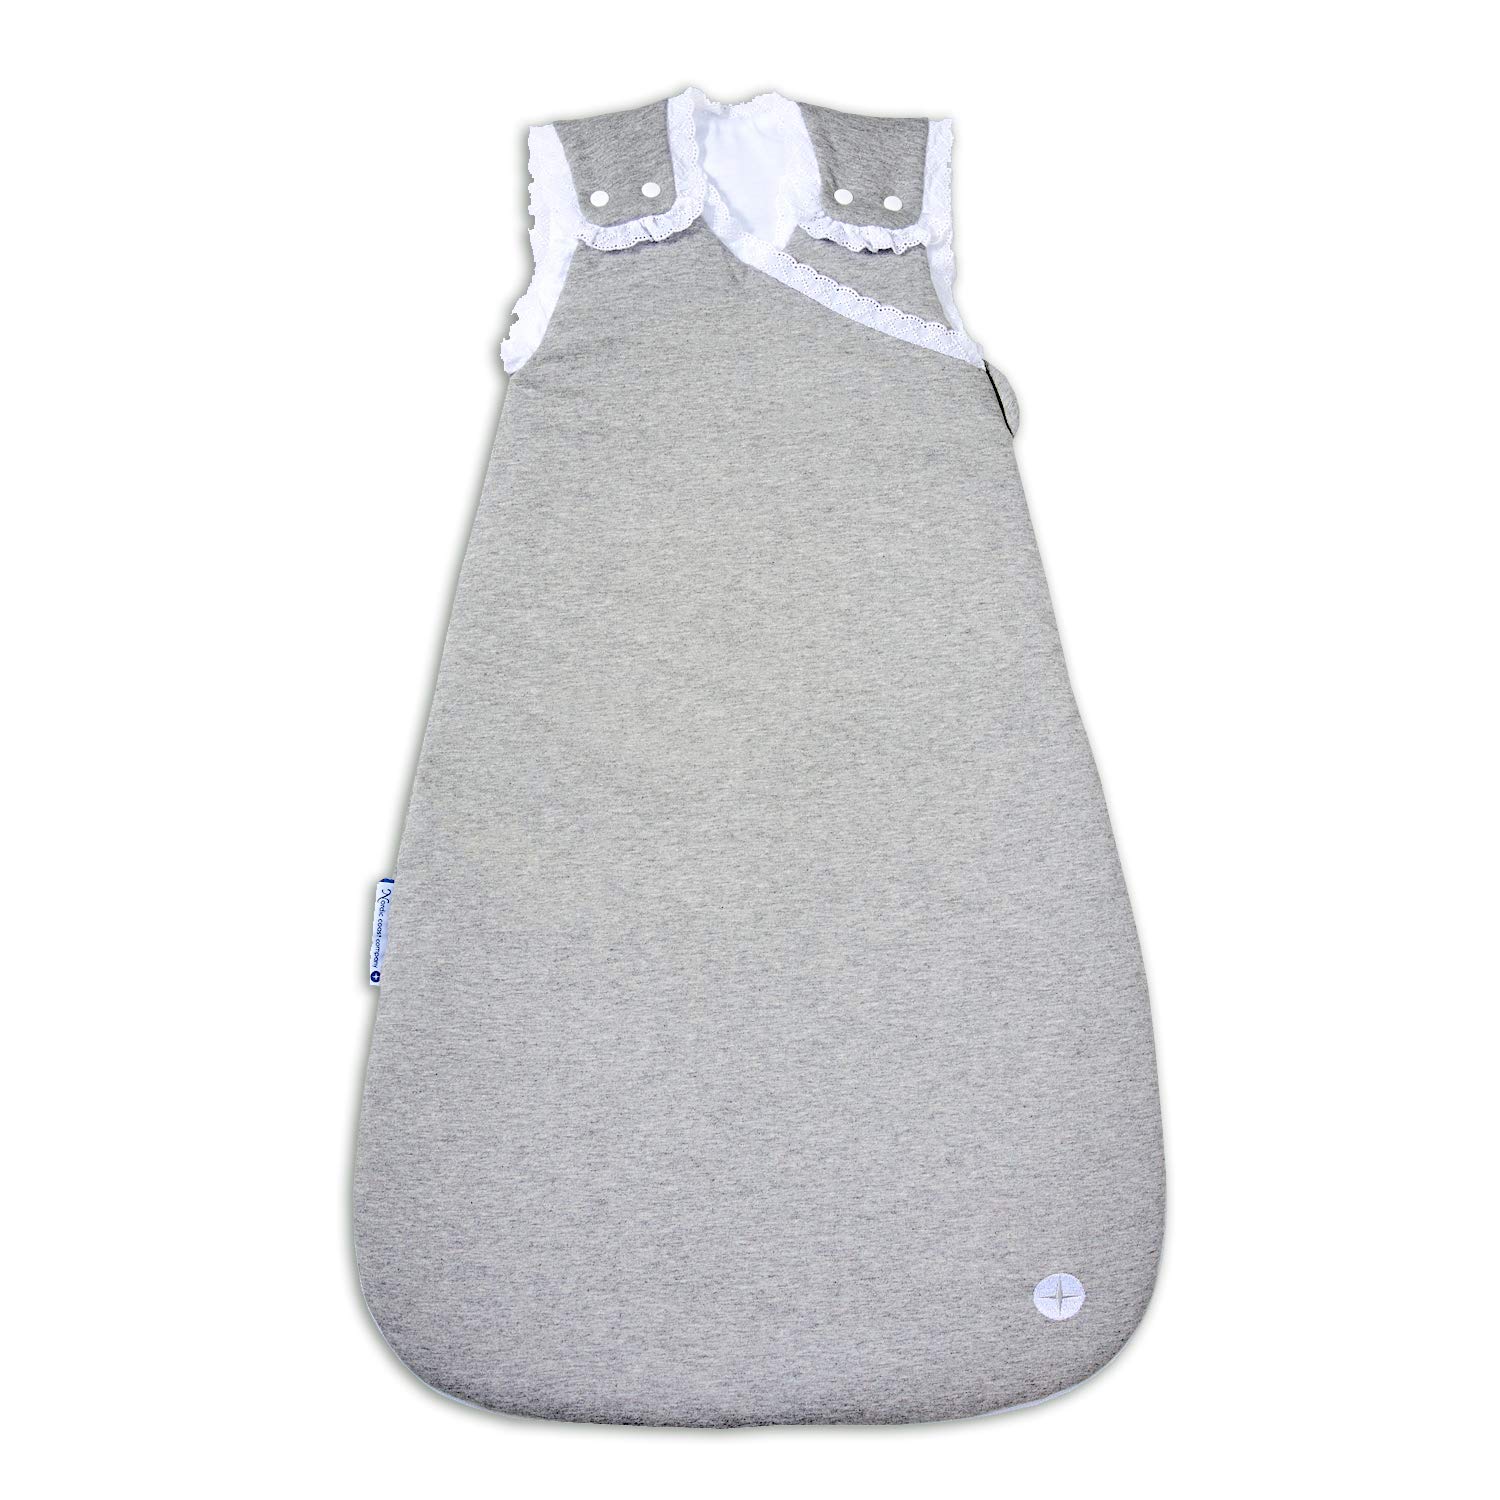 Baby Sleeping Bag Newborn 60 cm Nordic Coast Grey & Lace 0-3 Months All-Year Baby Sleeping Bag for 18-21° Room Temperature Ideal for Baby Bed